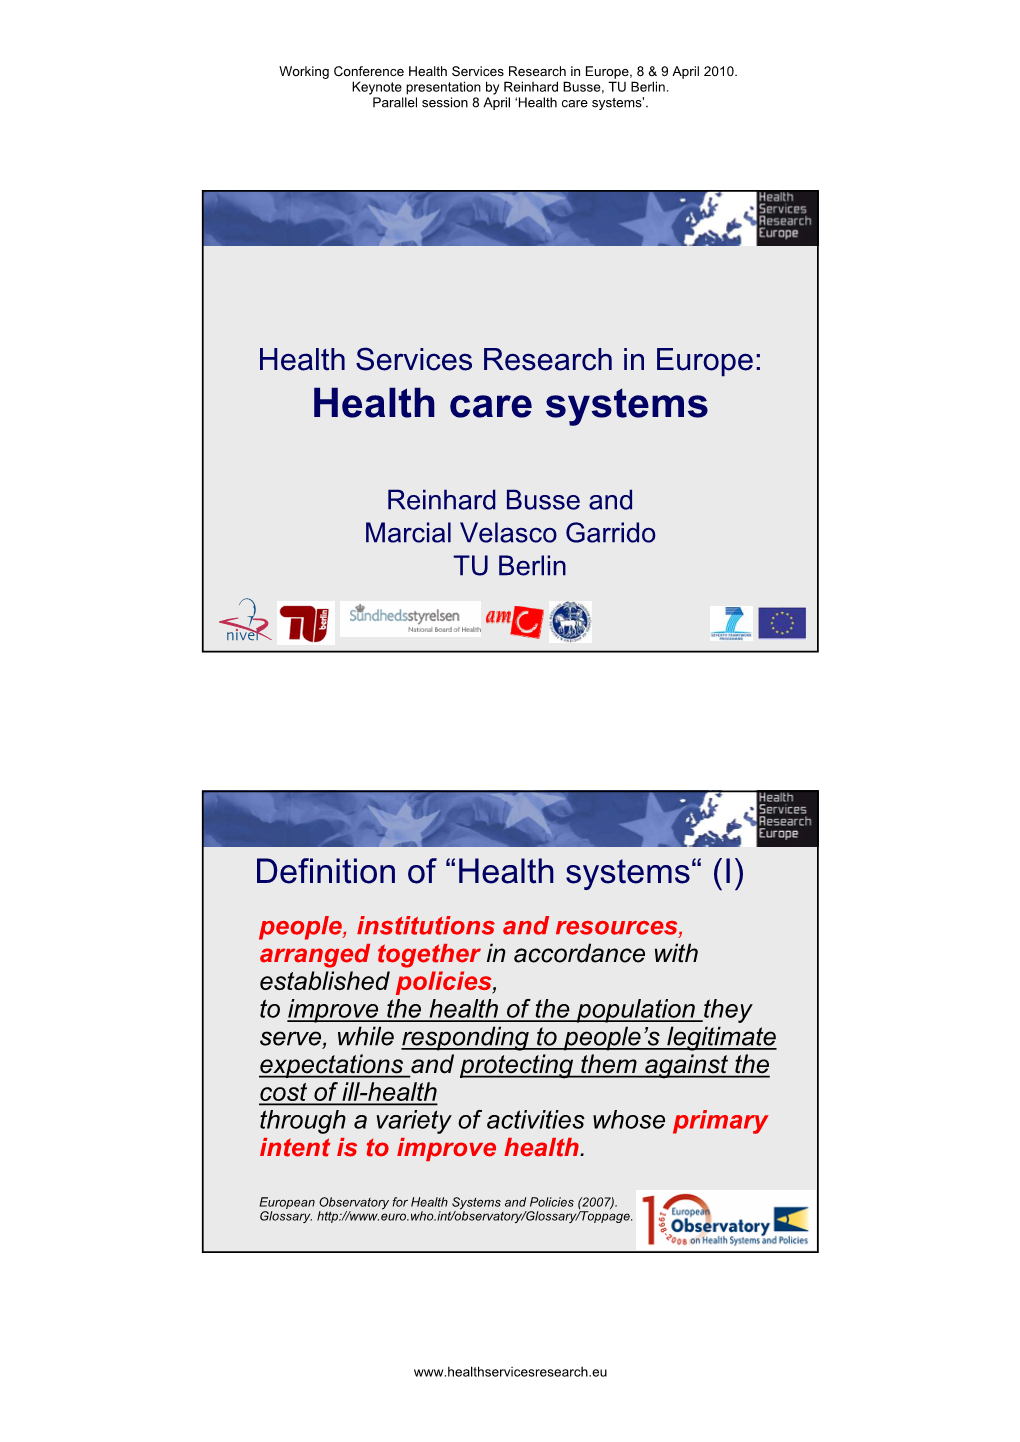 Health Care Systems’